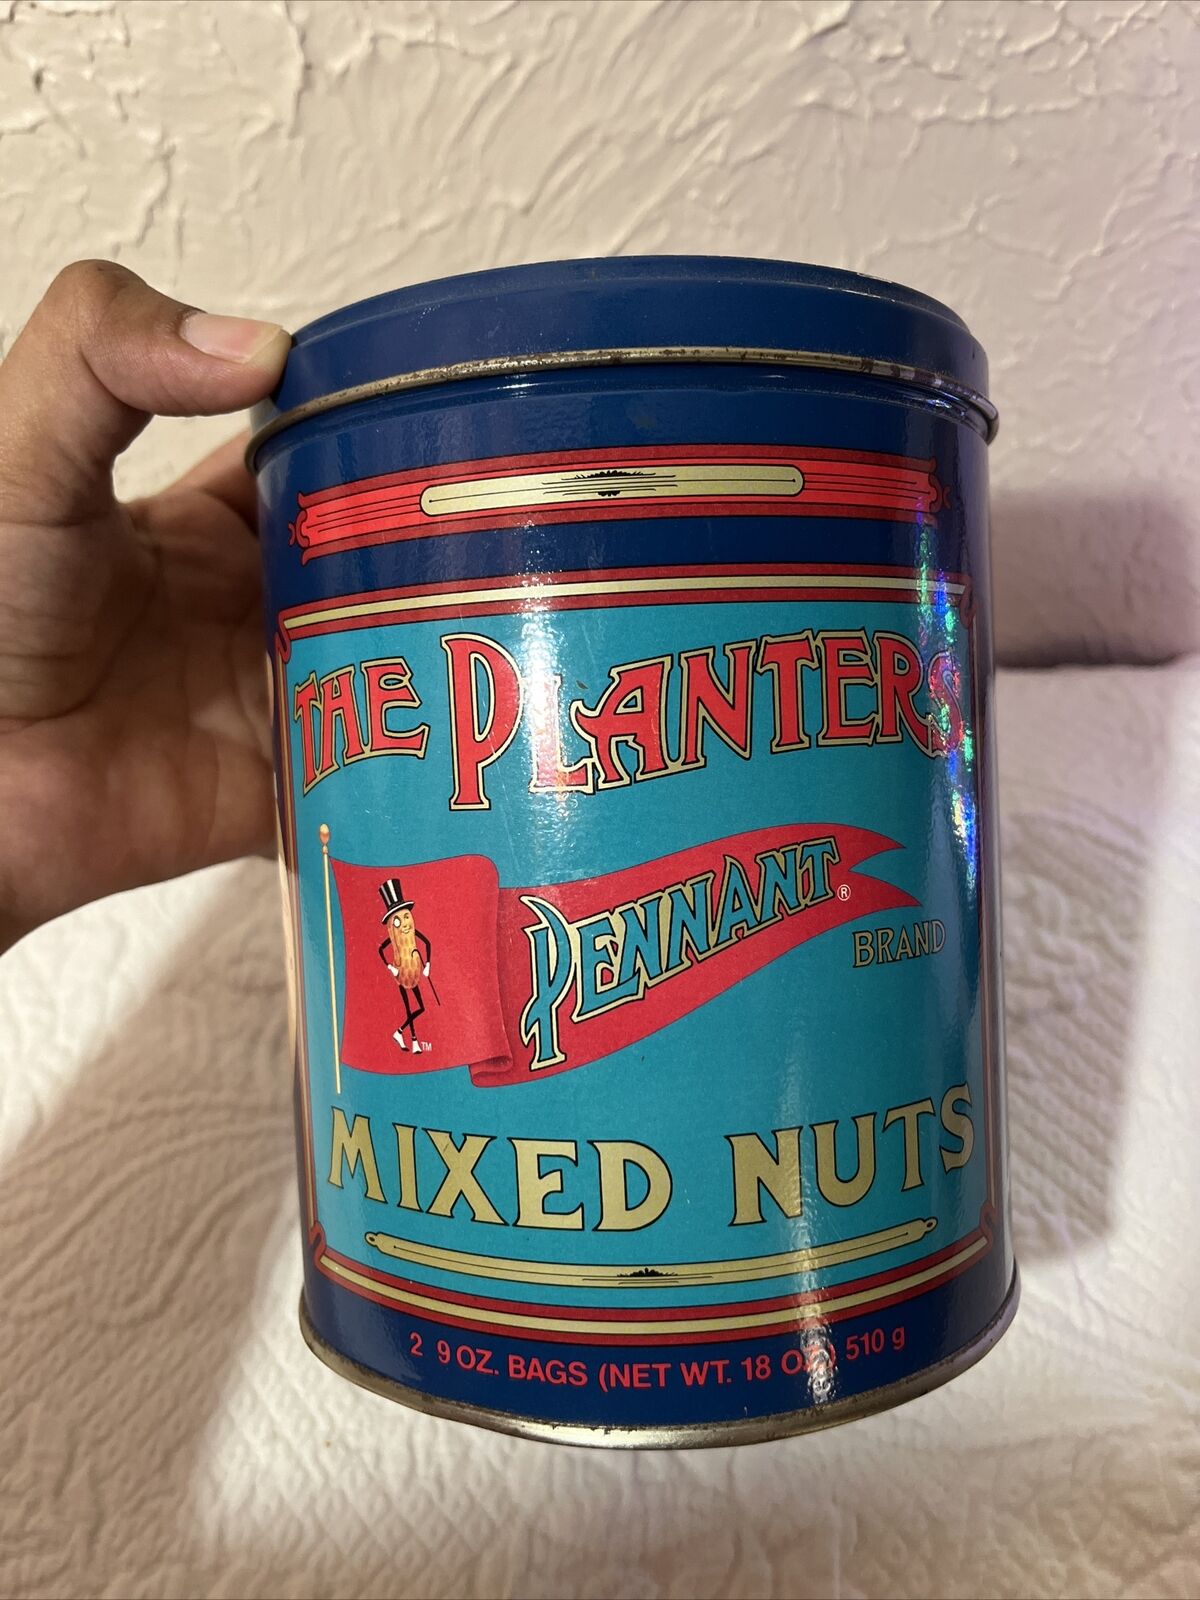 Vintage 1989 Large Planters Peanuts Limited Edition Mixed Nuts Tin Can 18 oz